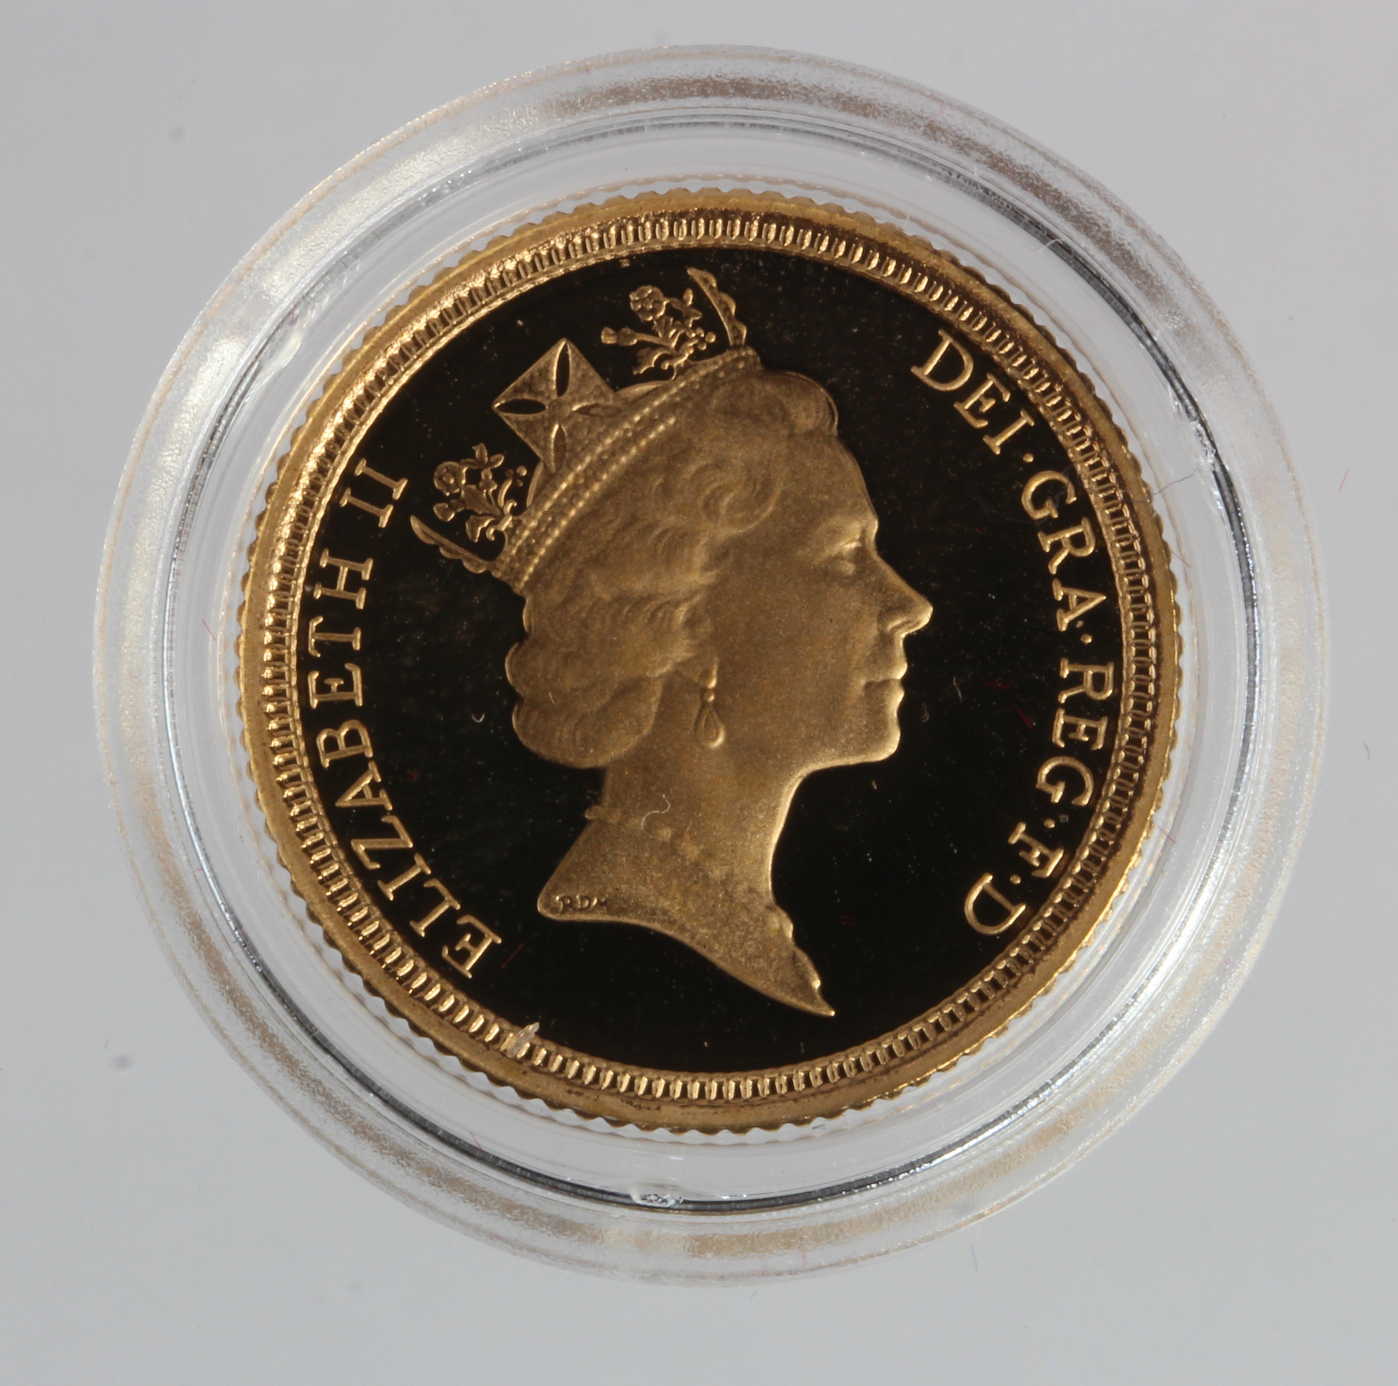 Half Sovereign 1994 Proof FDC in a hard plastic capsule - Image 2 of 2